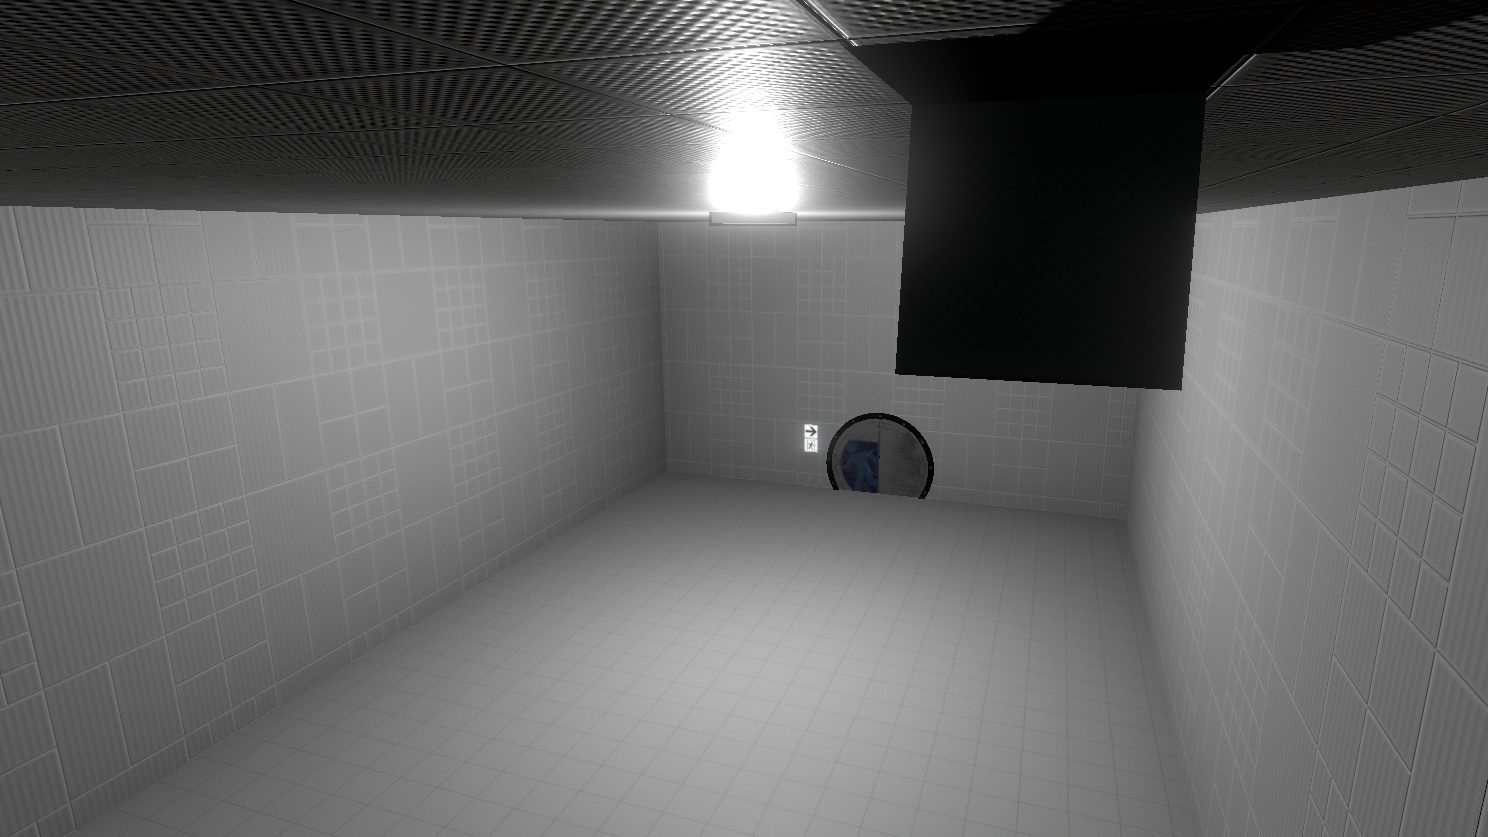 SCP-173's Chamber - Roblox